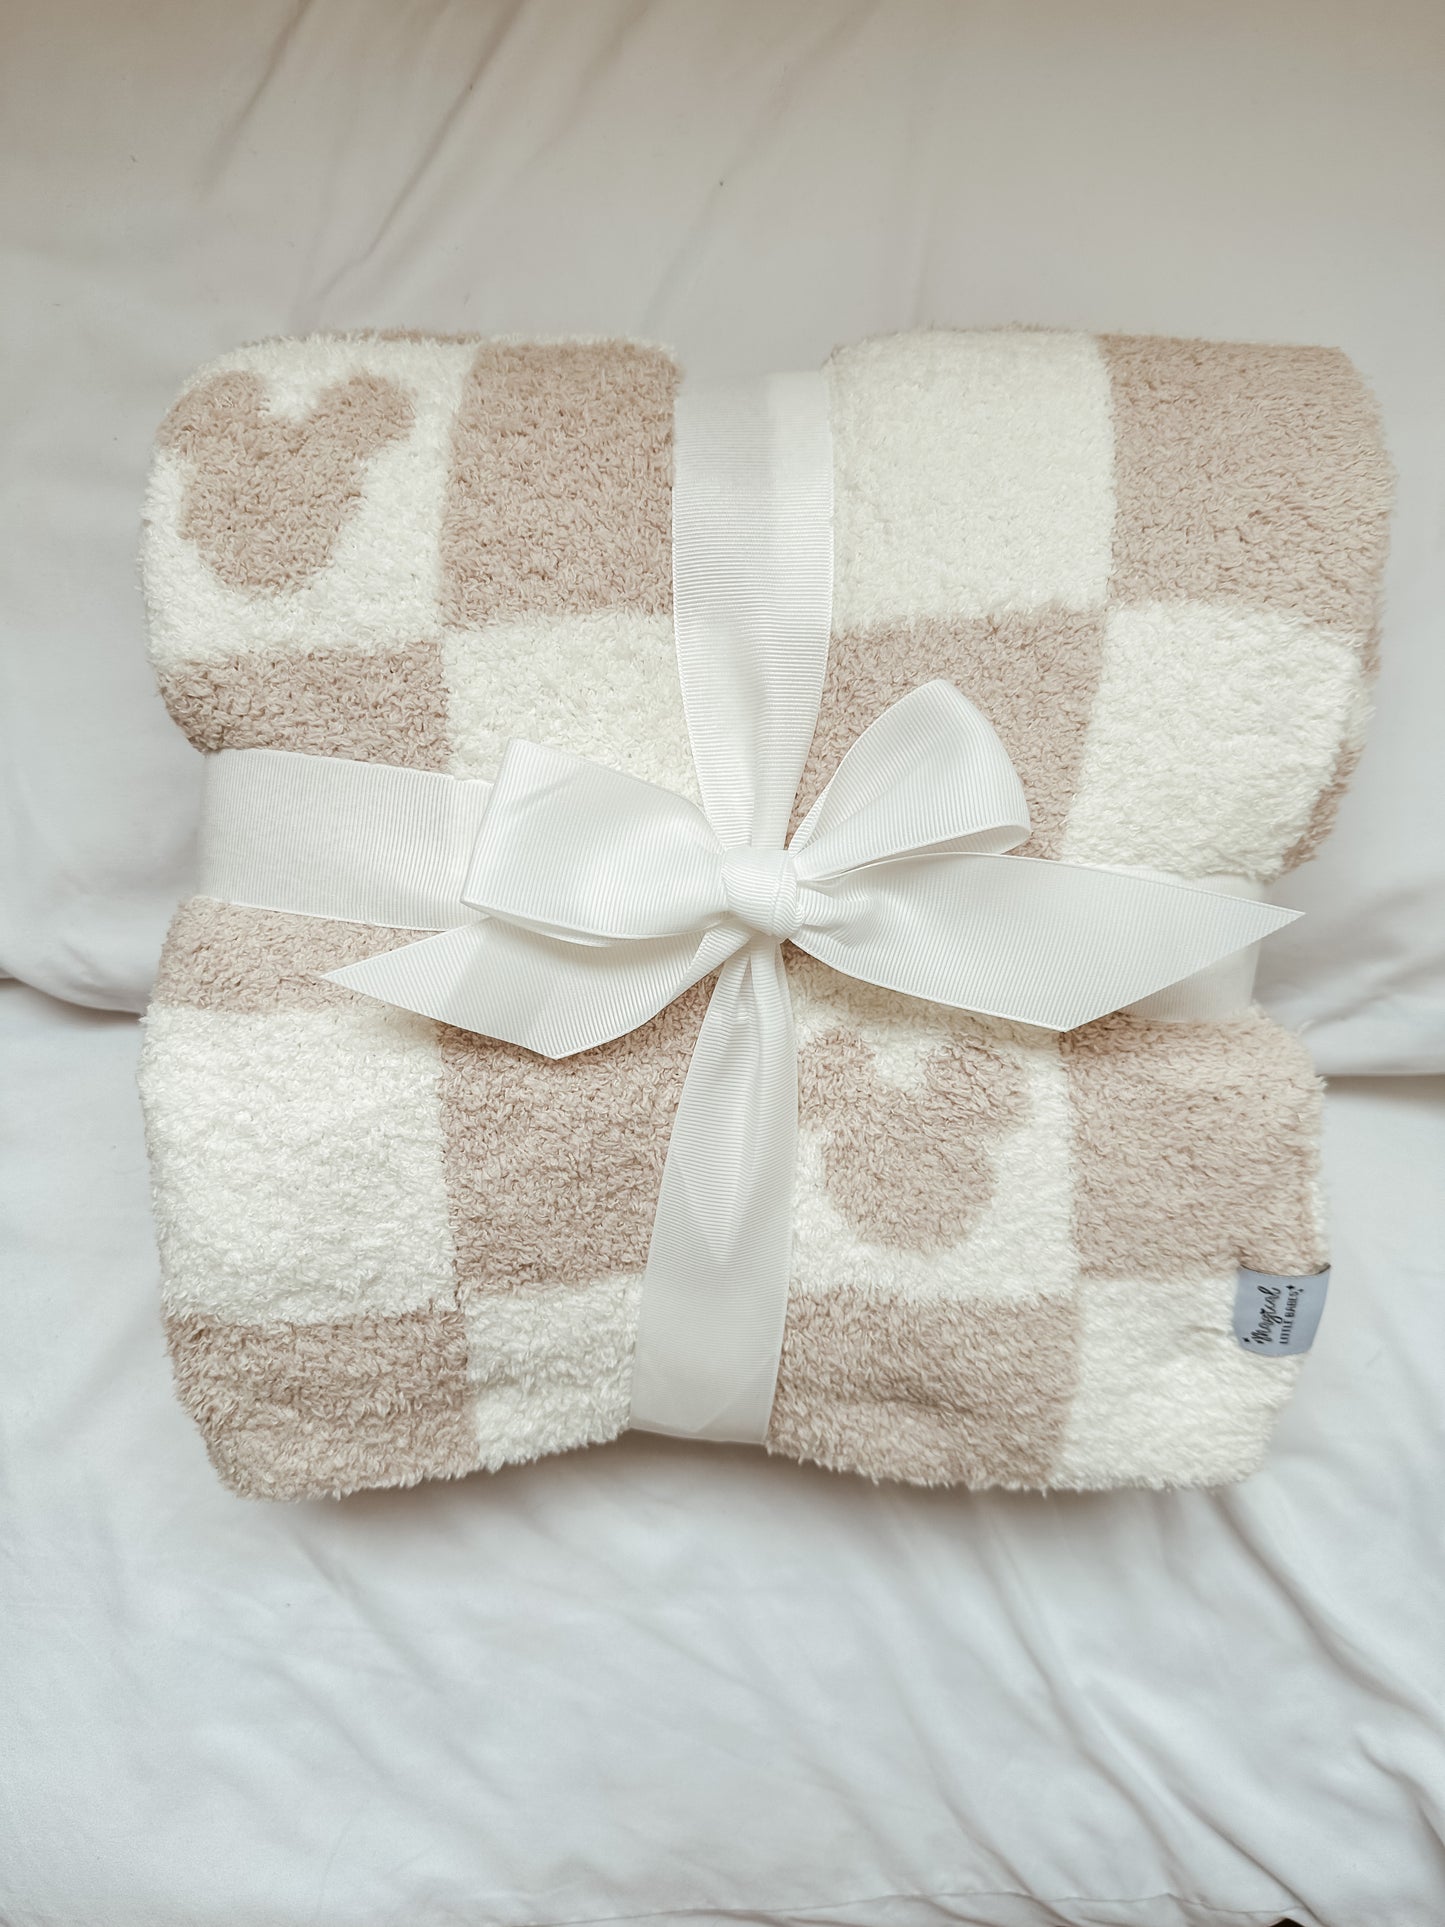 Made of Magic Checkered Blanket *READY TO SHIP